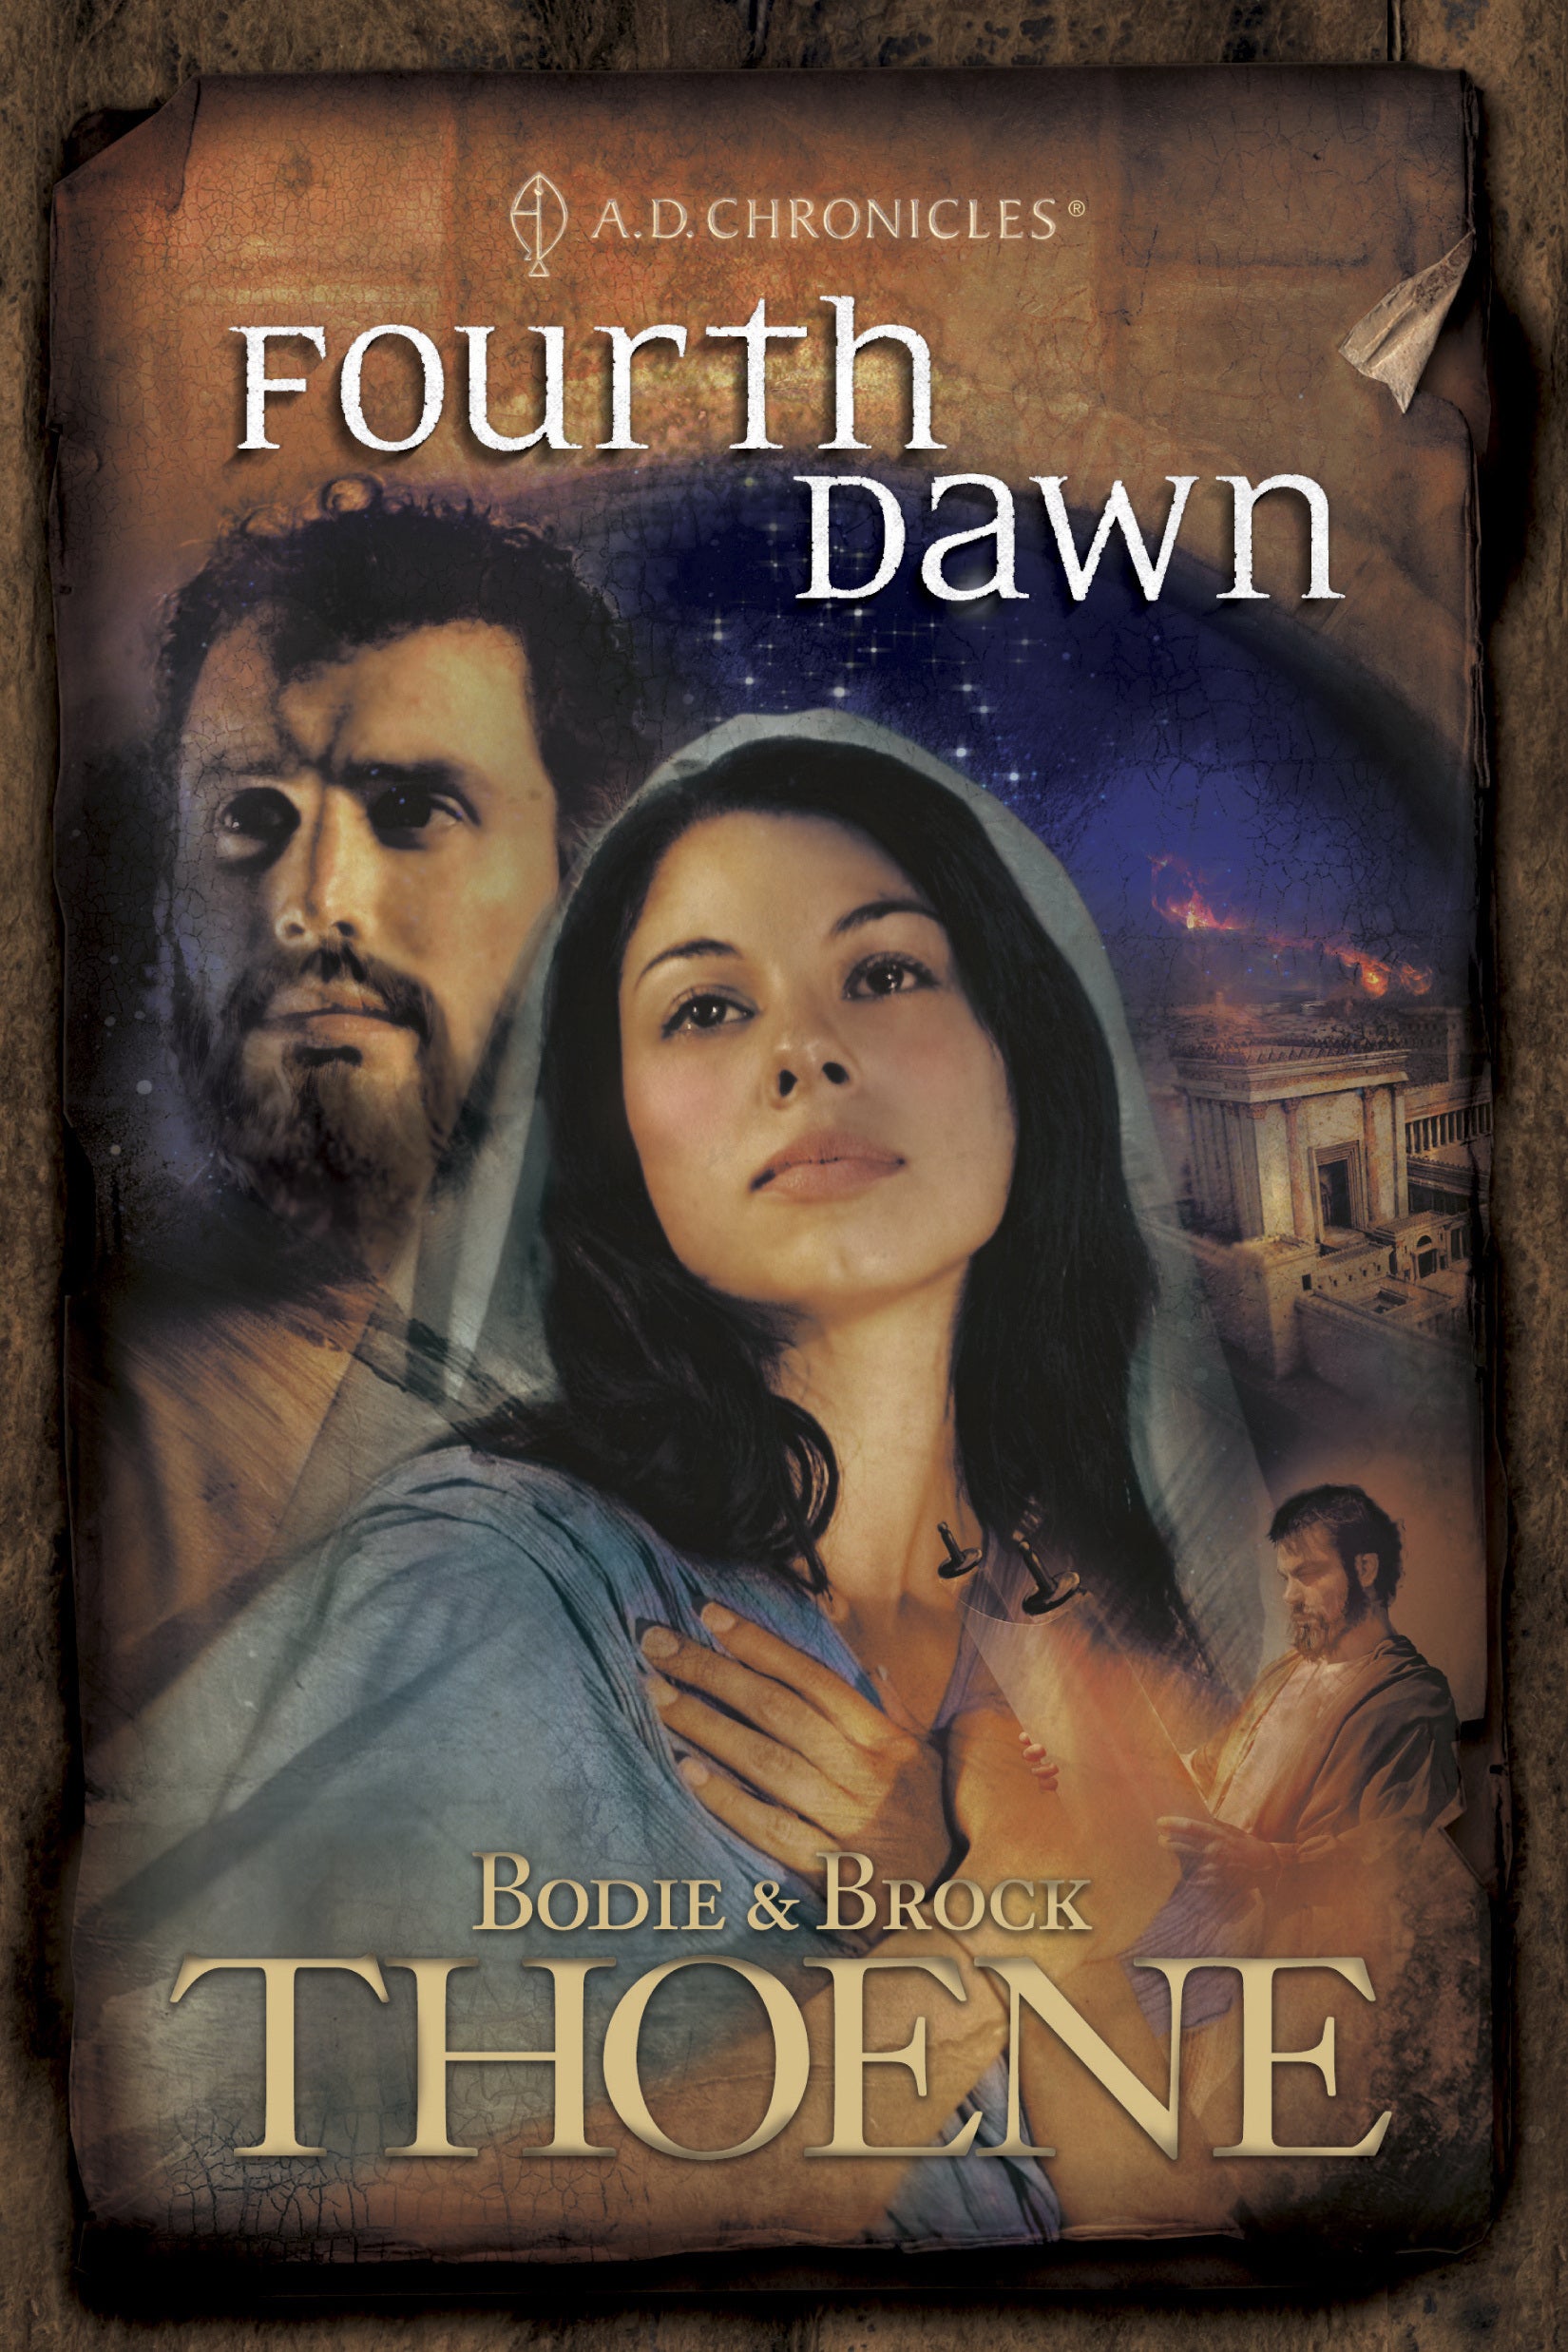 Image of Fourth Dawn other